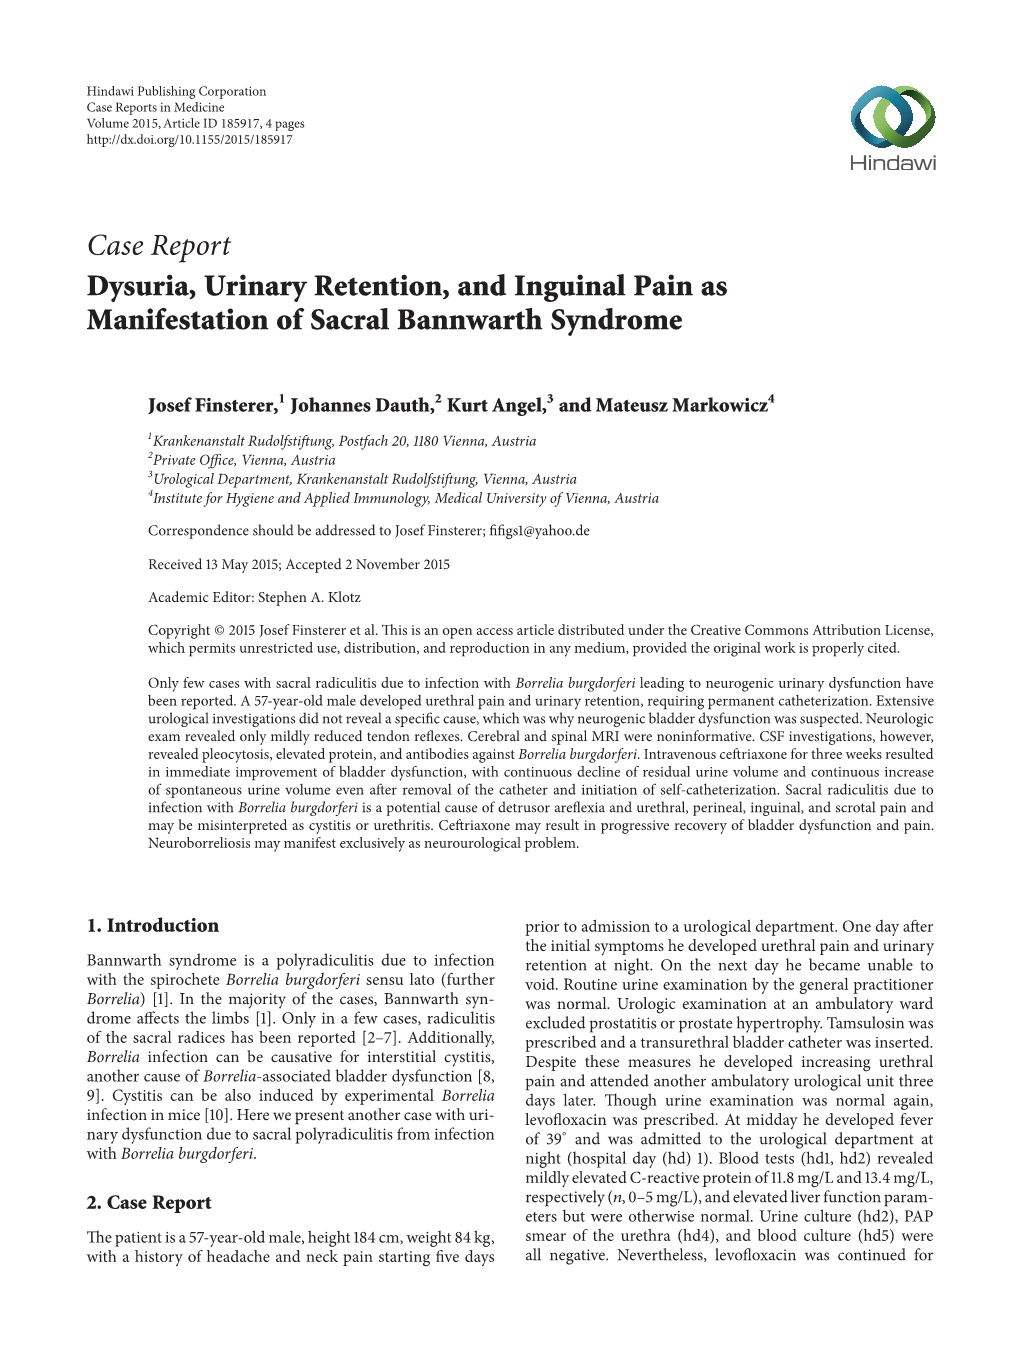 Dysuria, Urinary Retention, and Inguinal Pain As Manifestation of Sacral Bannwarth Syndrome